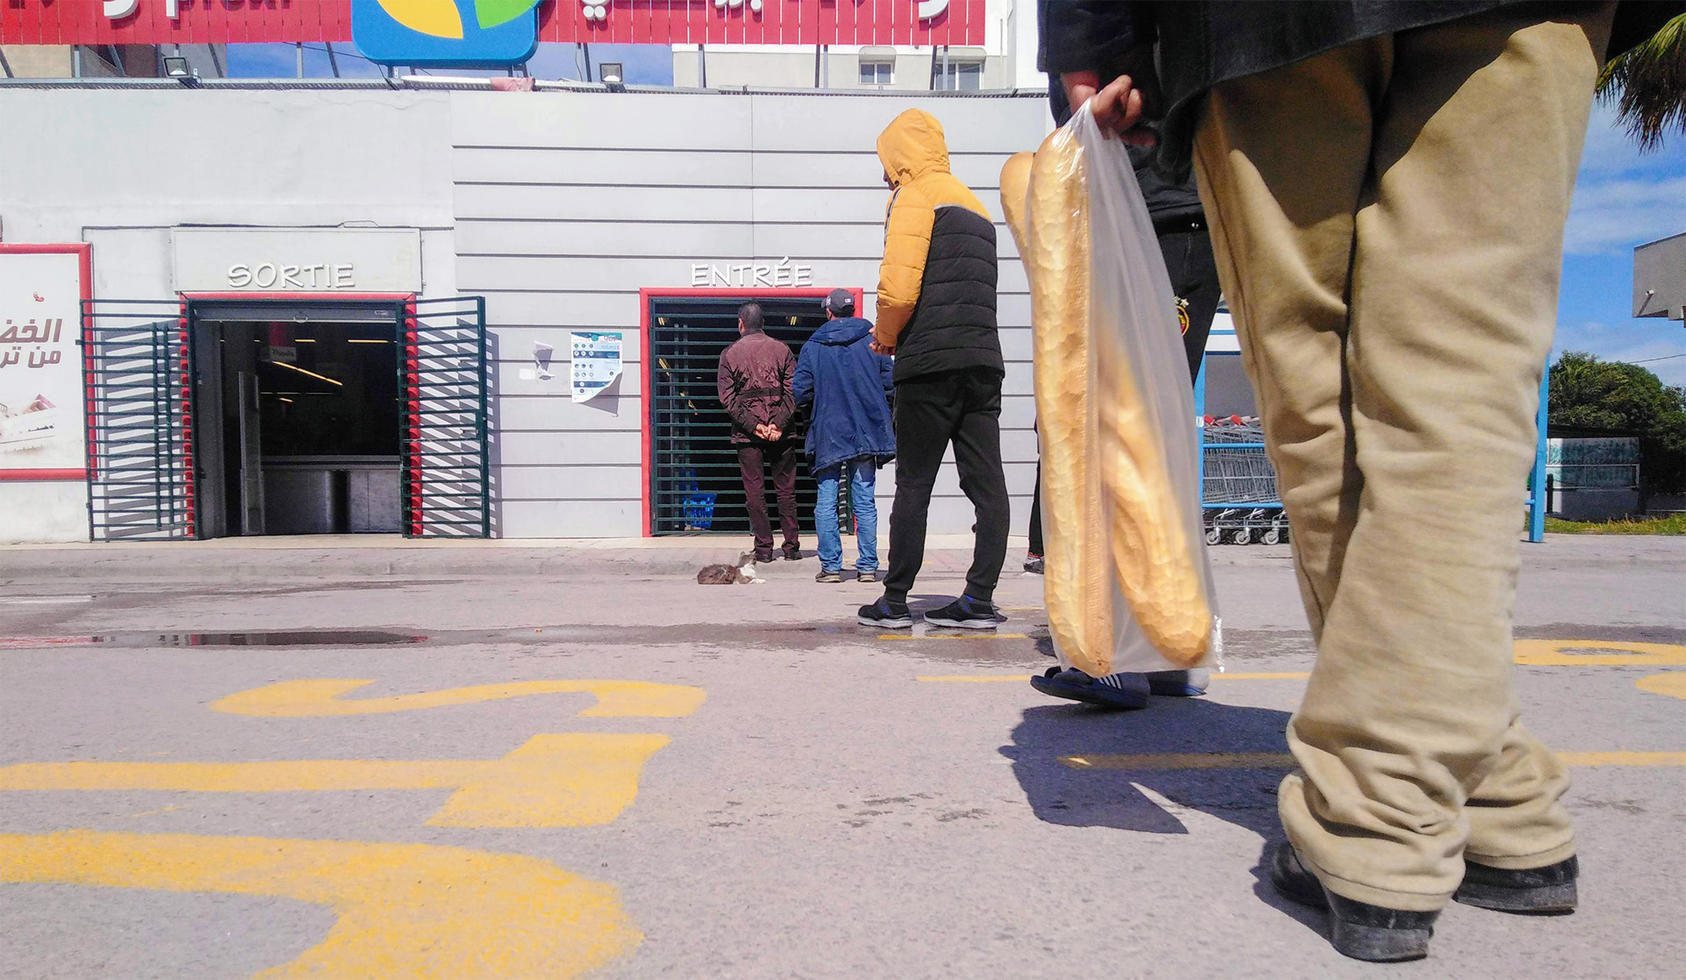 Tunisians wait in line to enter a grocery store amid COVID-19 lockdown measures. March 27, 2020. (Brahim Guedich)